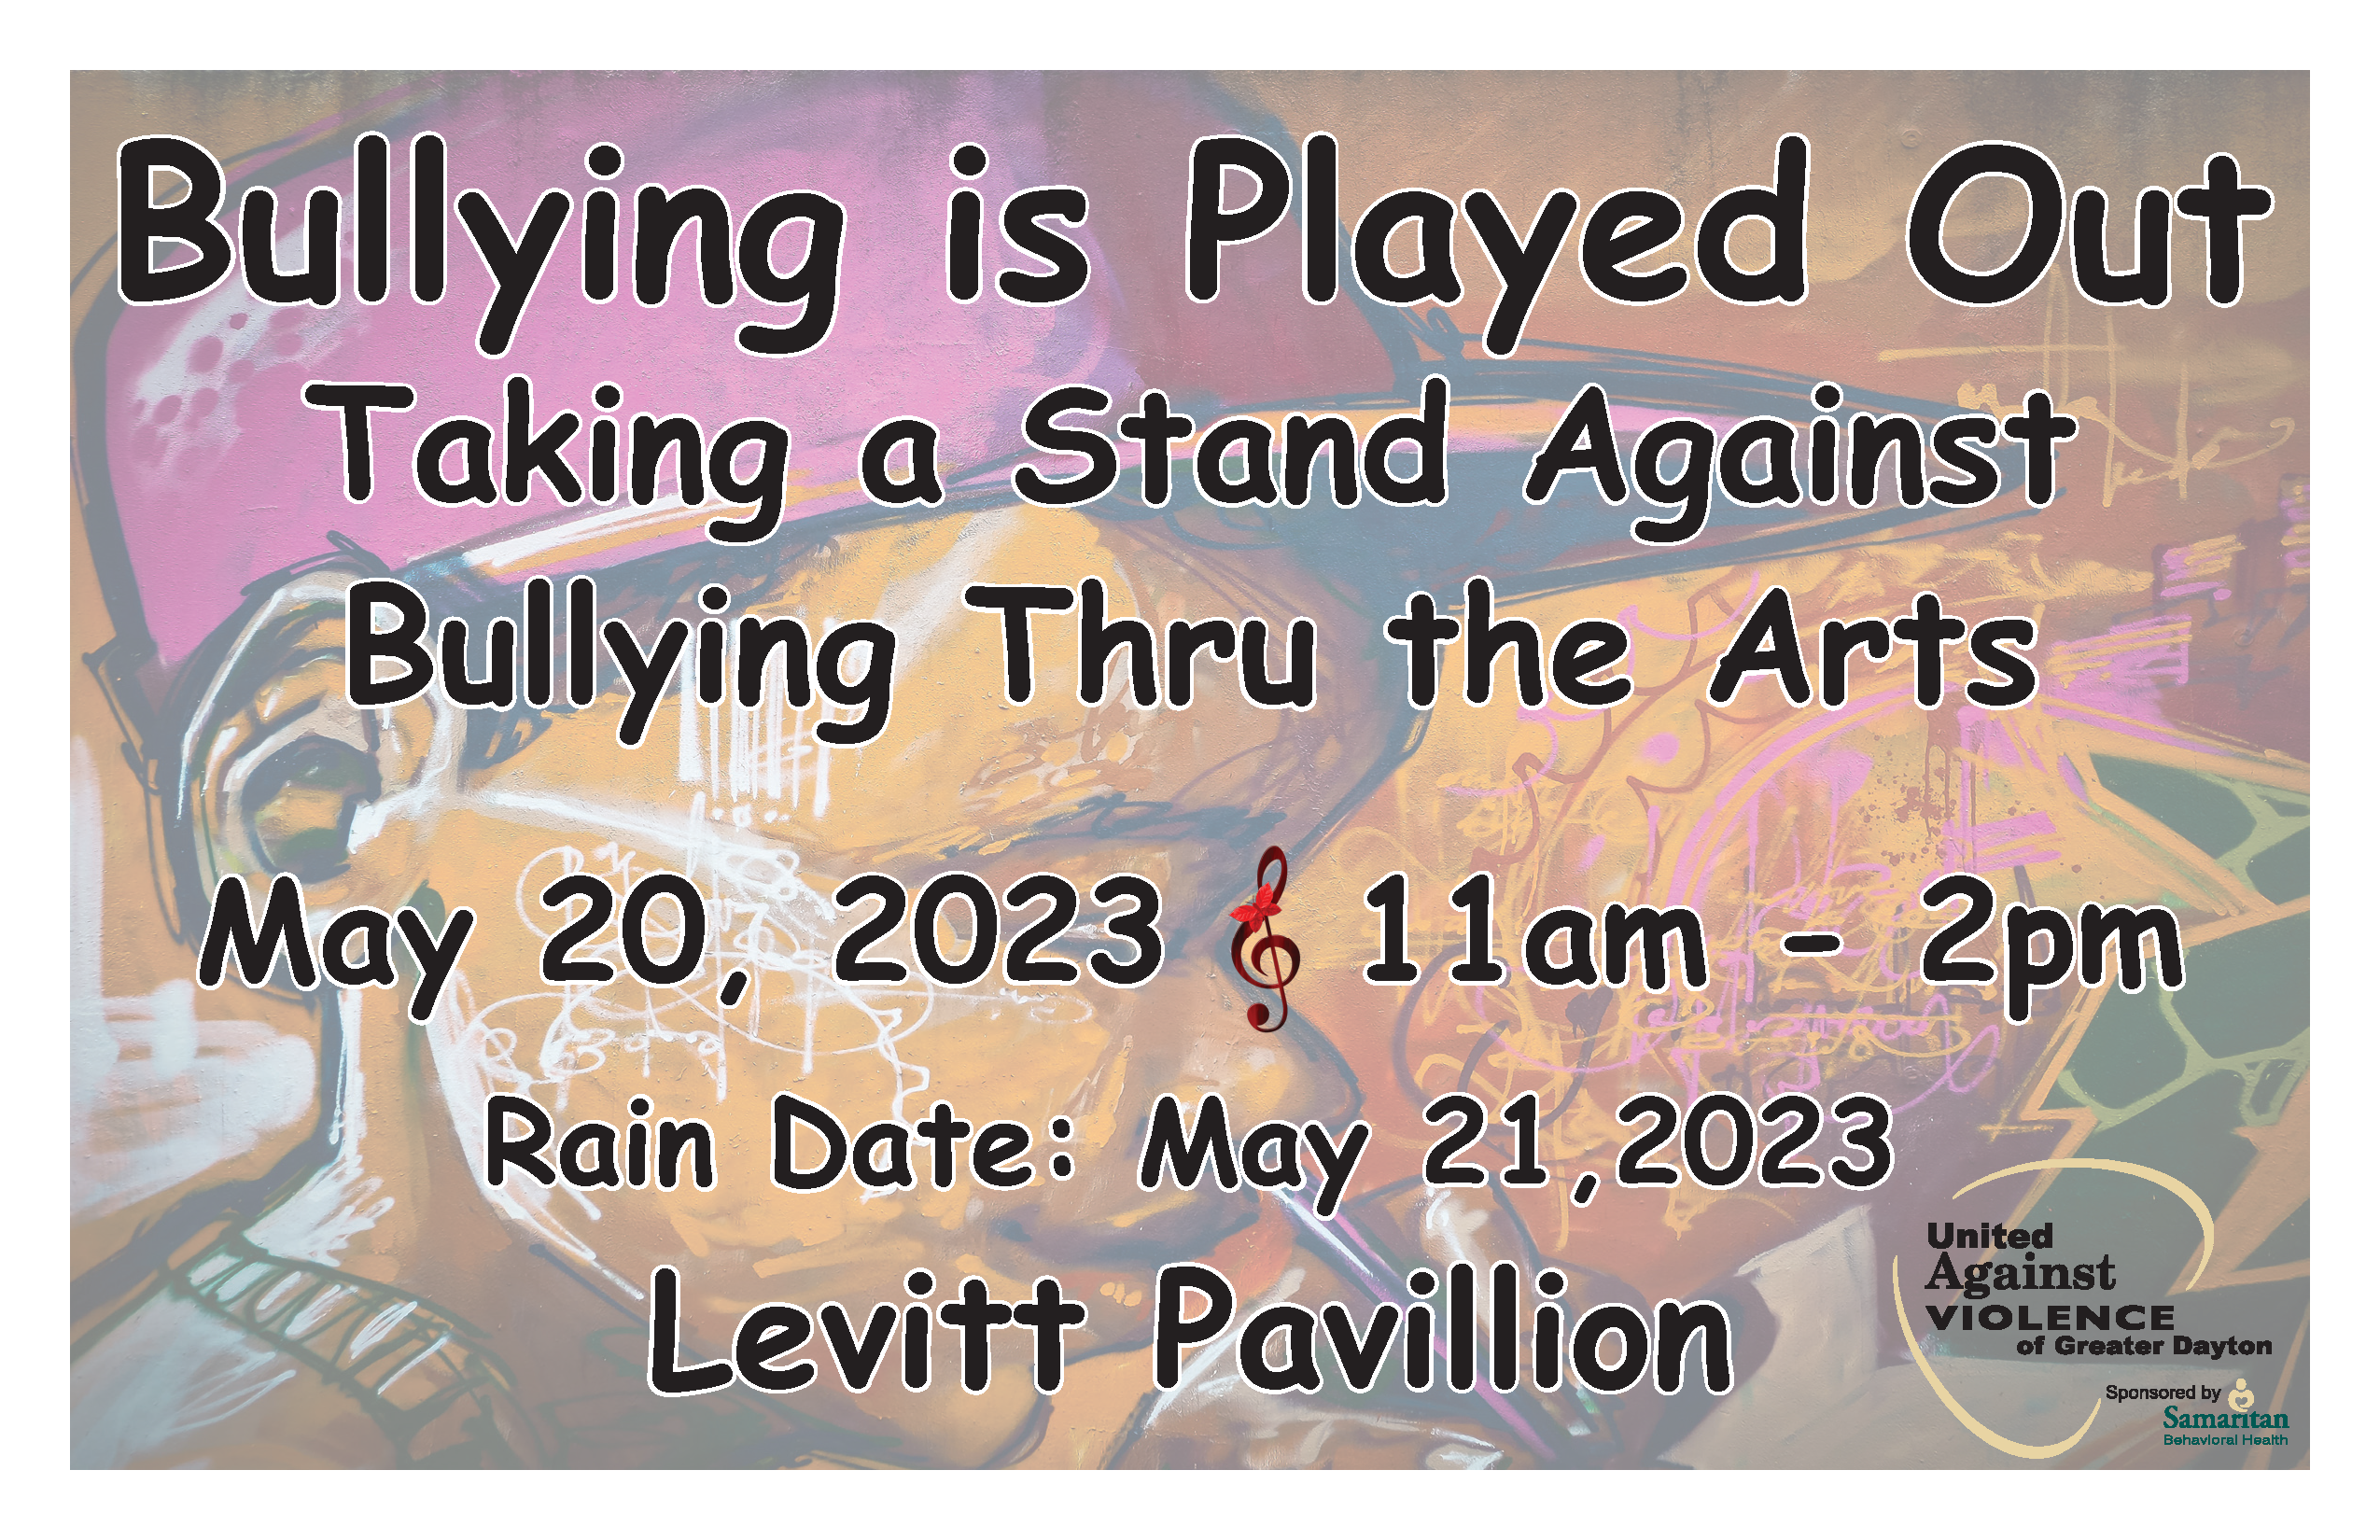 Bullying is Played Out: Taking a Stand Against Bullying Thru the Arts feature image